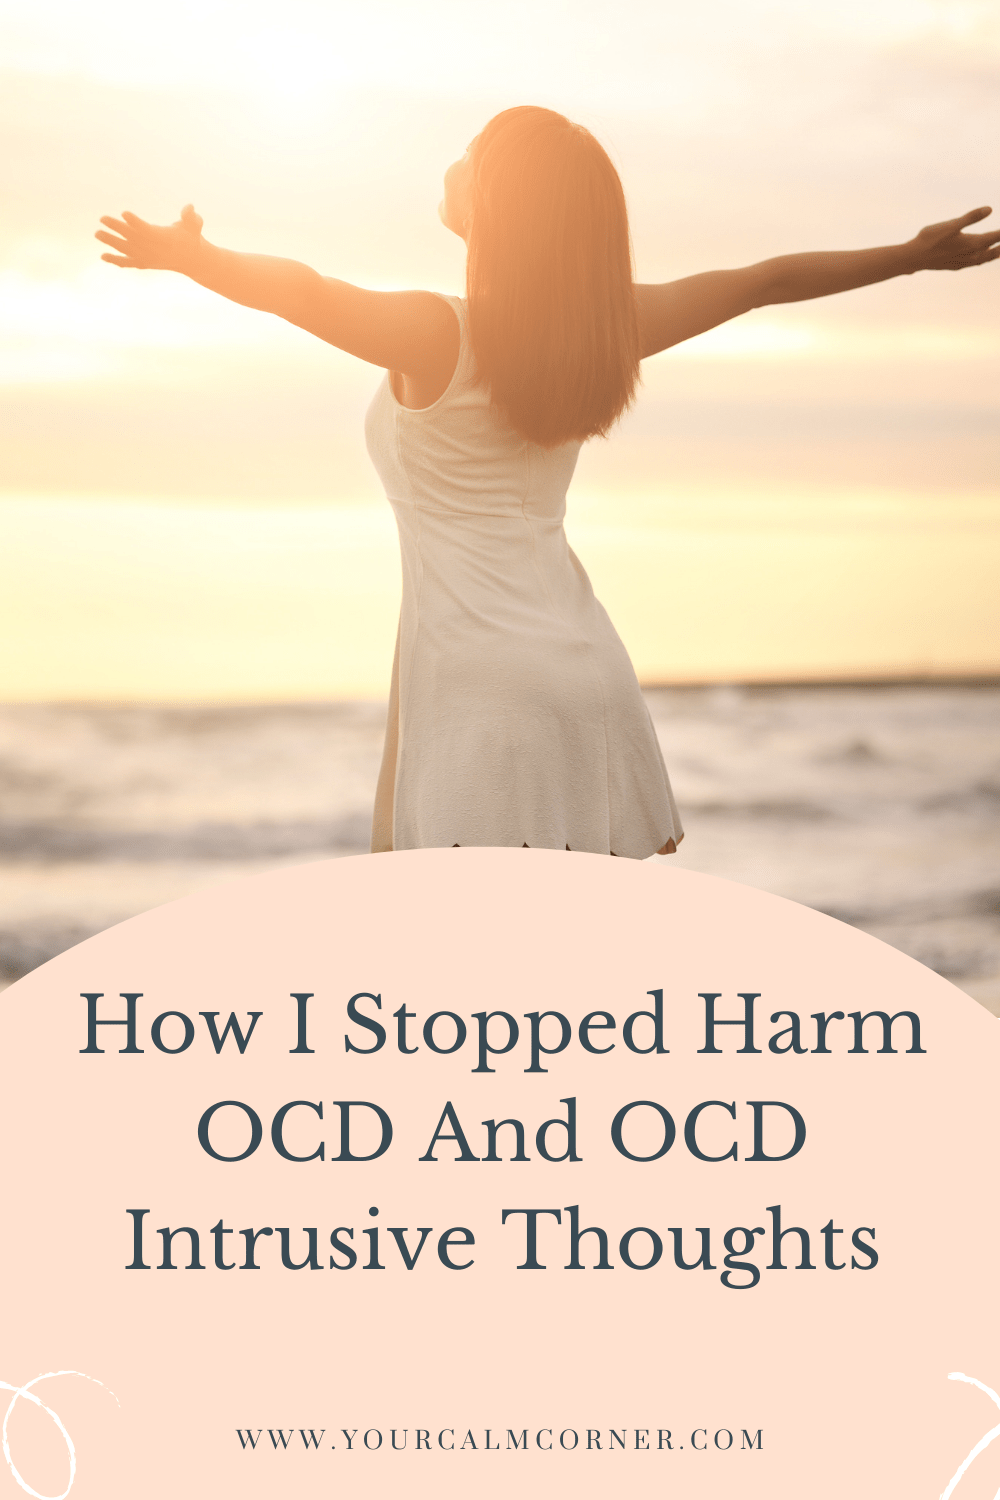 Pinterest on harm OCD and intrusive thoughts